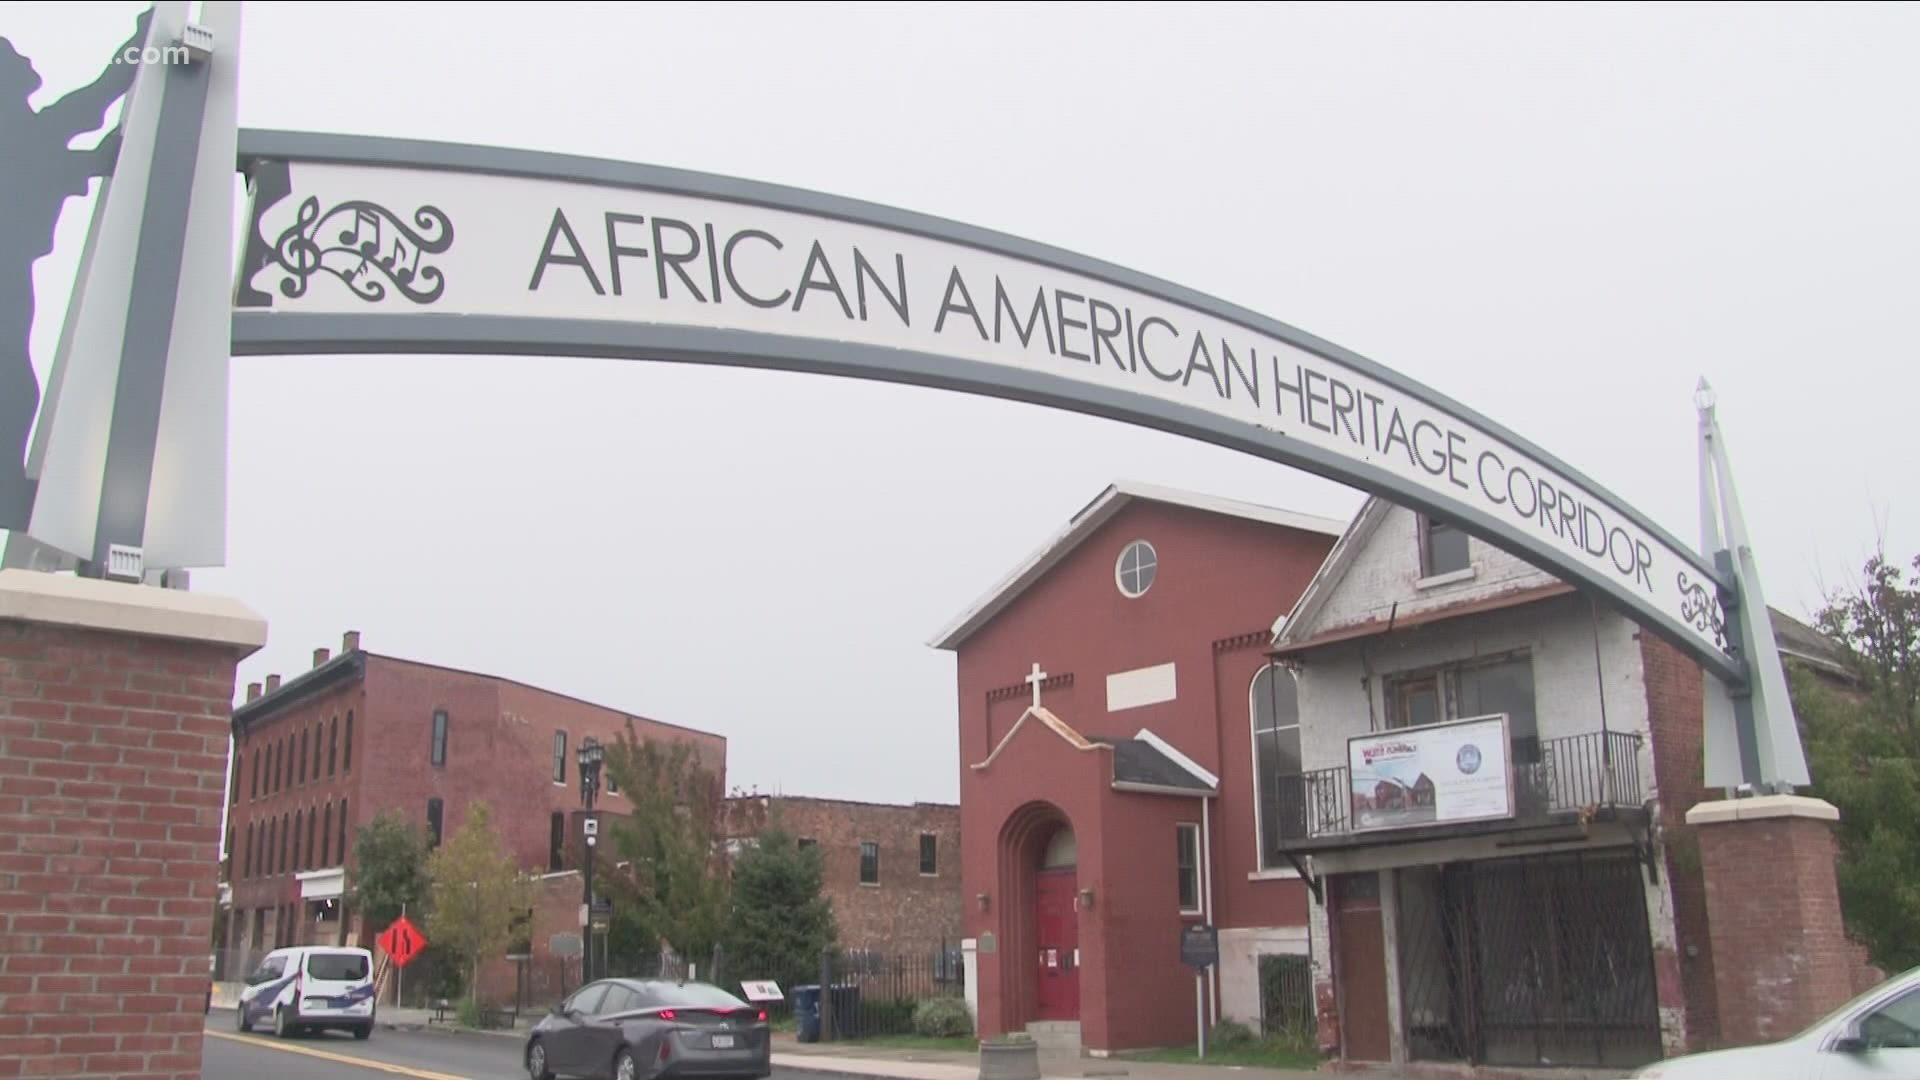 The commission received funding from the African American Cultural Heritage Action Fund.